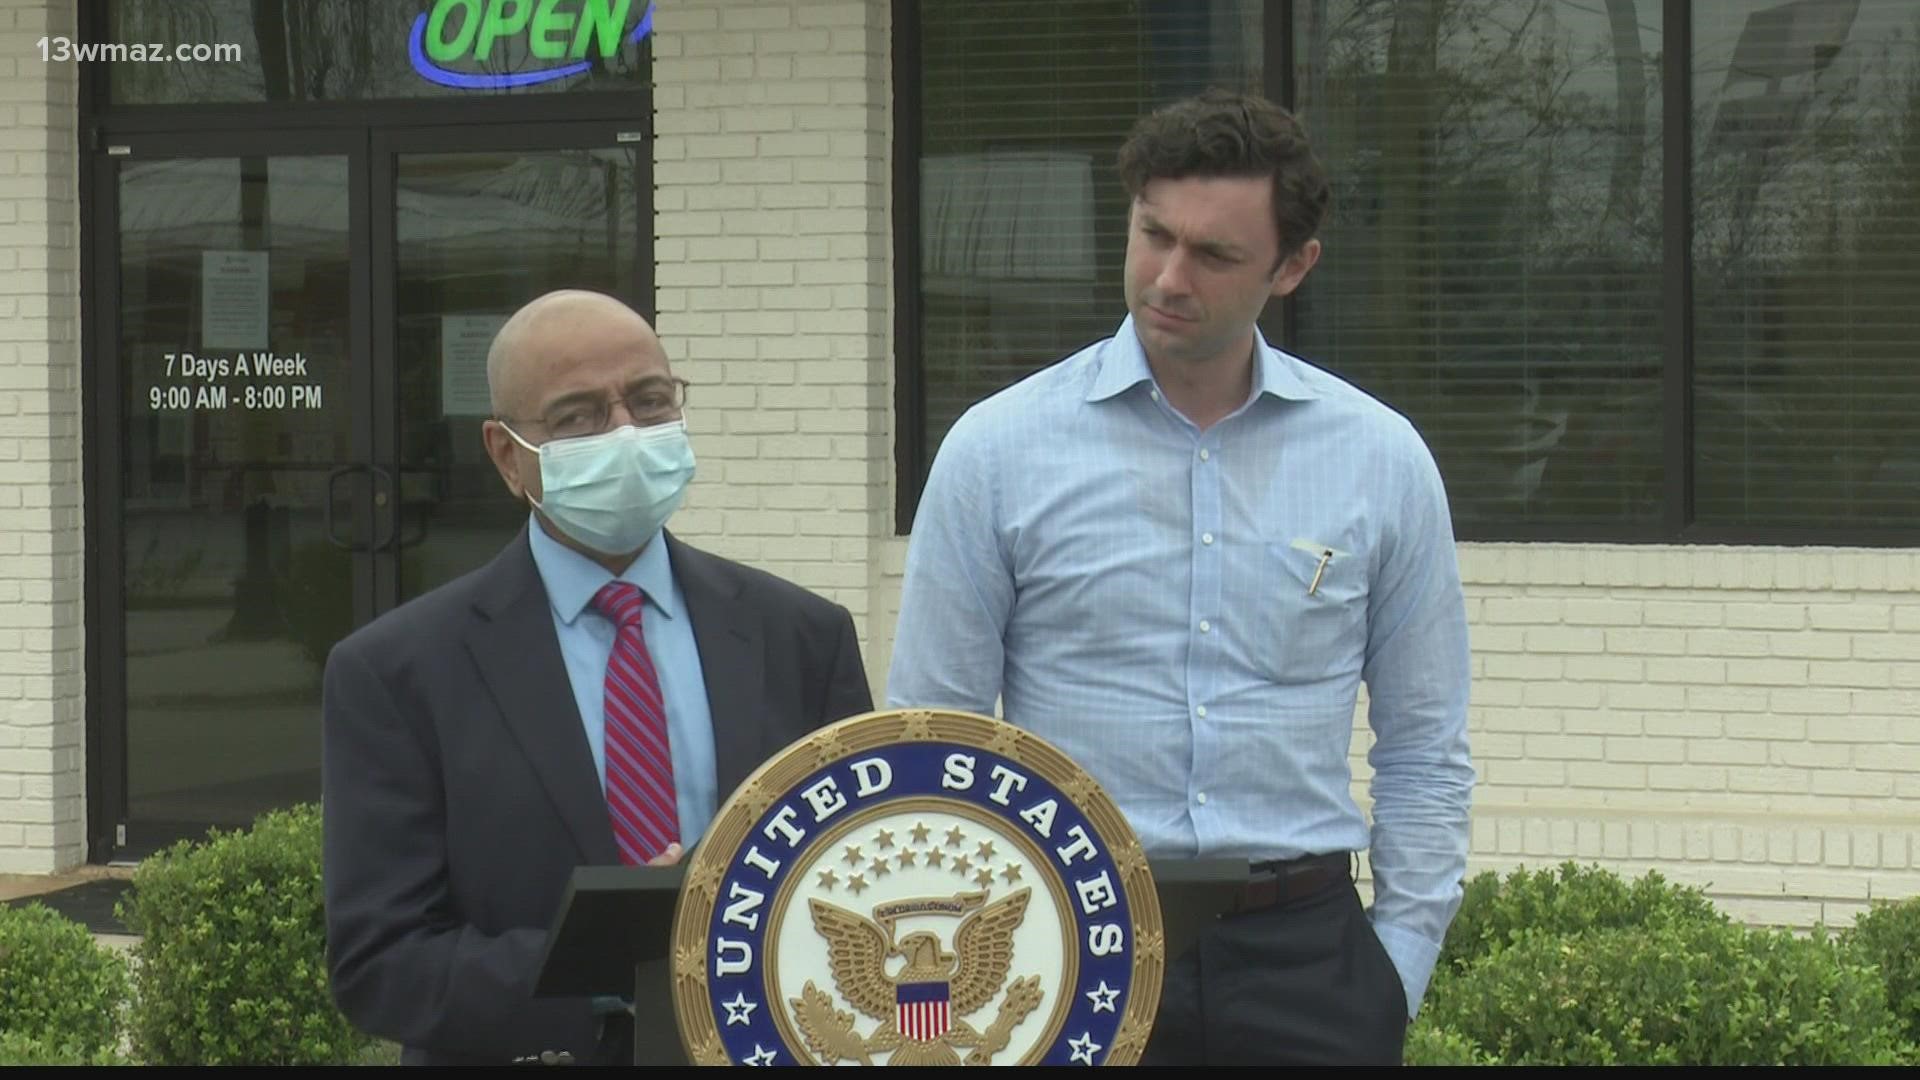 Senator Jon Ossoff says he wants to help Georgia's rural health care system. He says a Fort Valley clinic is an example of what is needed.